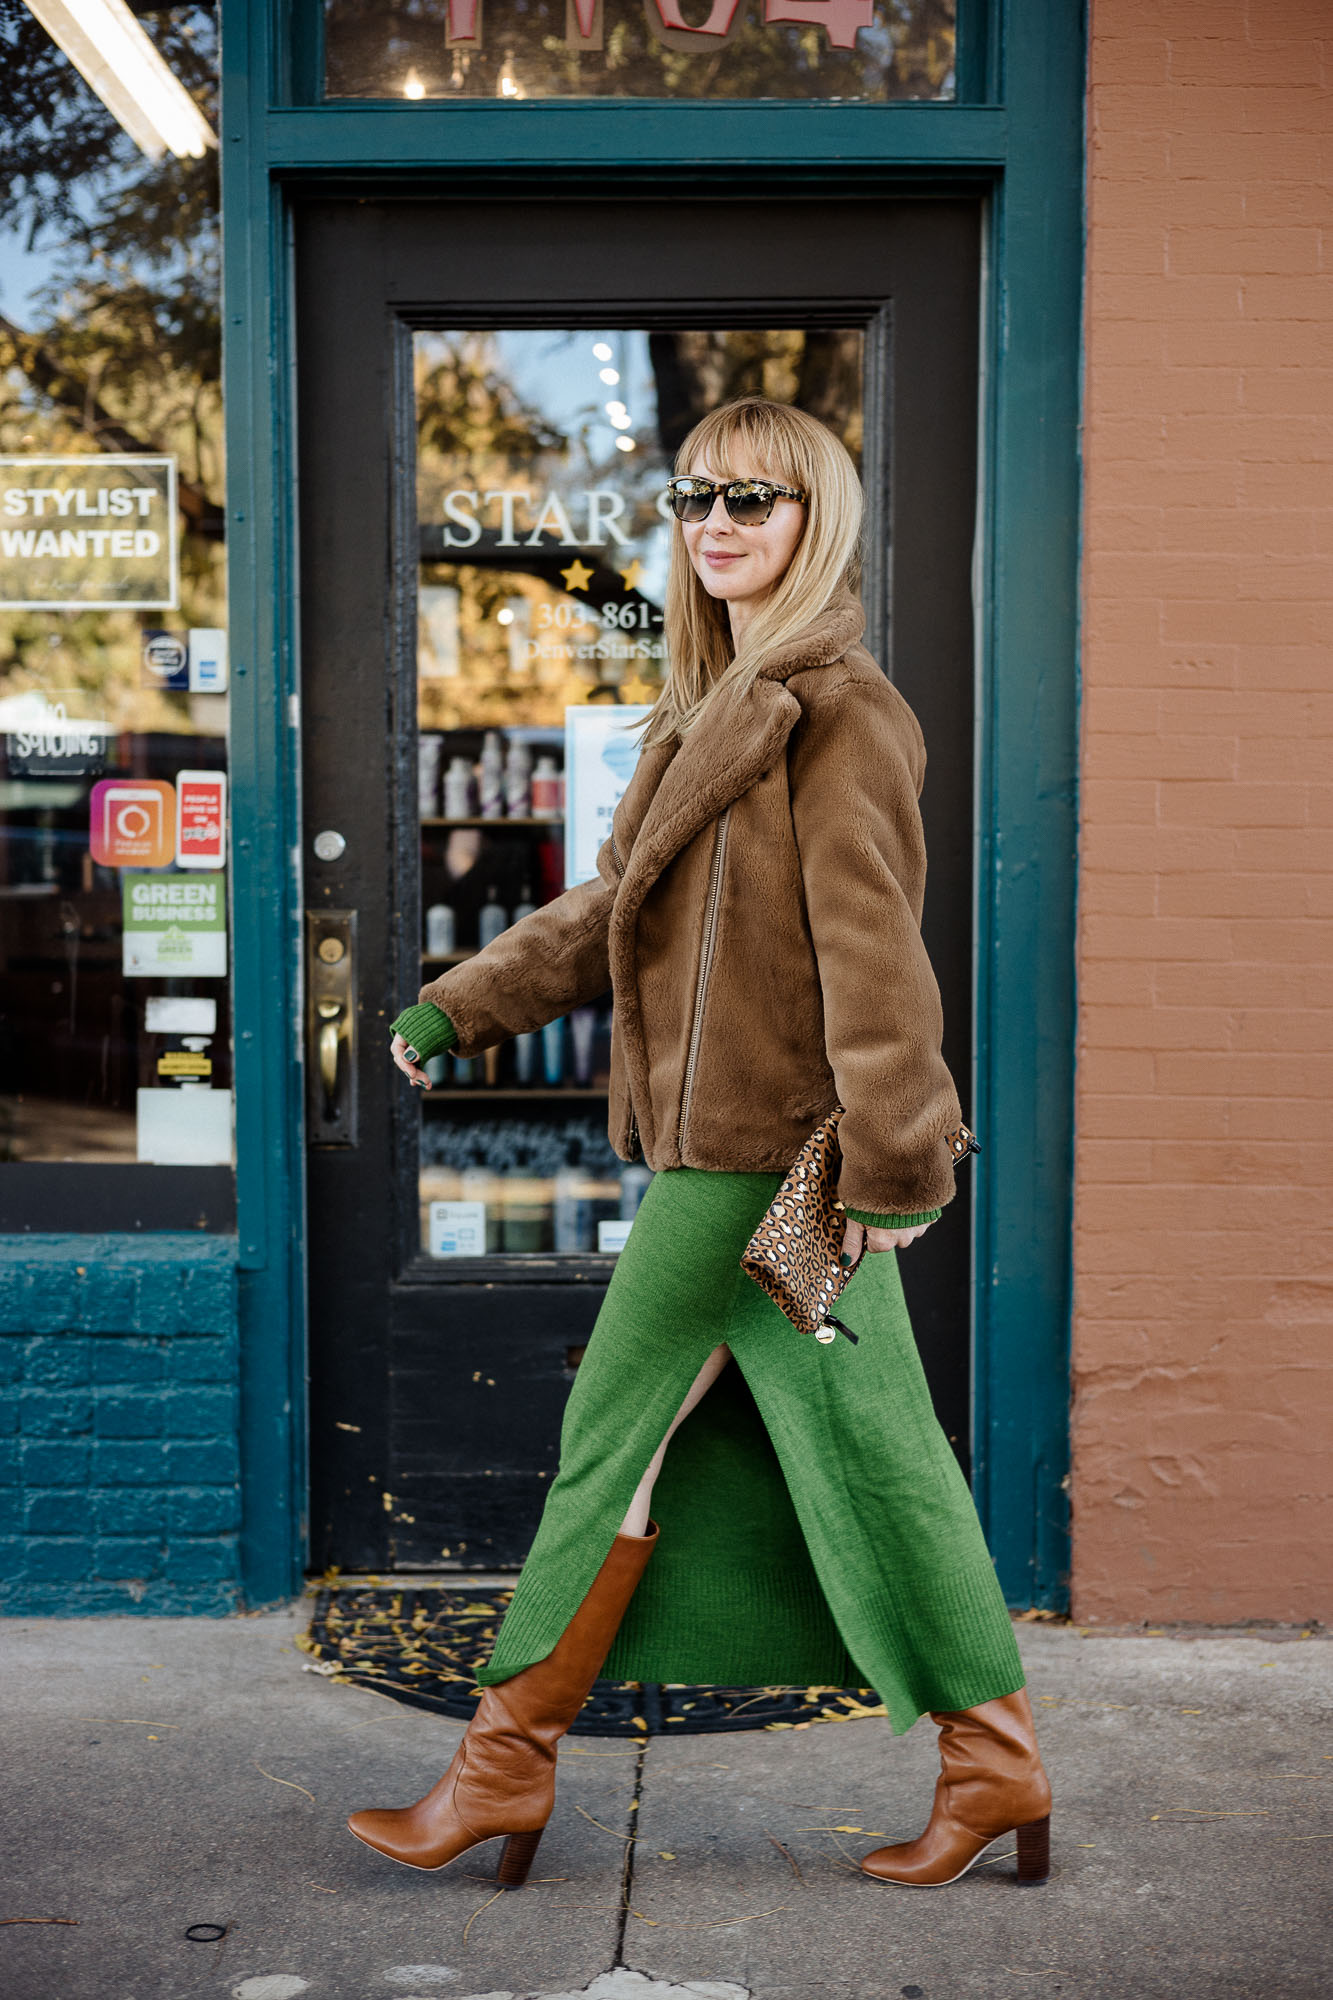 Wearing the Staud crown dress in emerald green with a Vince faux fur coat in brown and Loeffler Randall cognac boots.